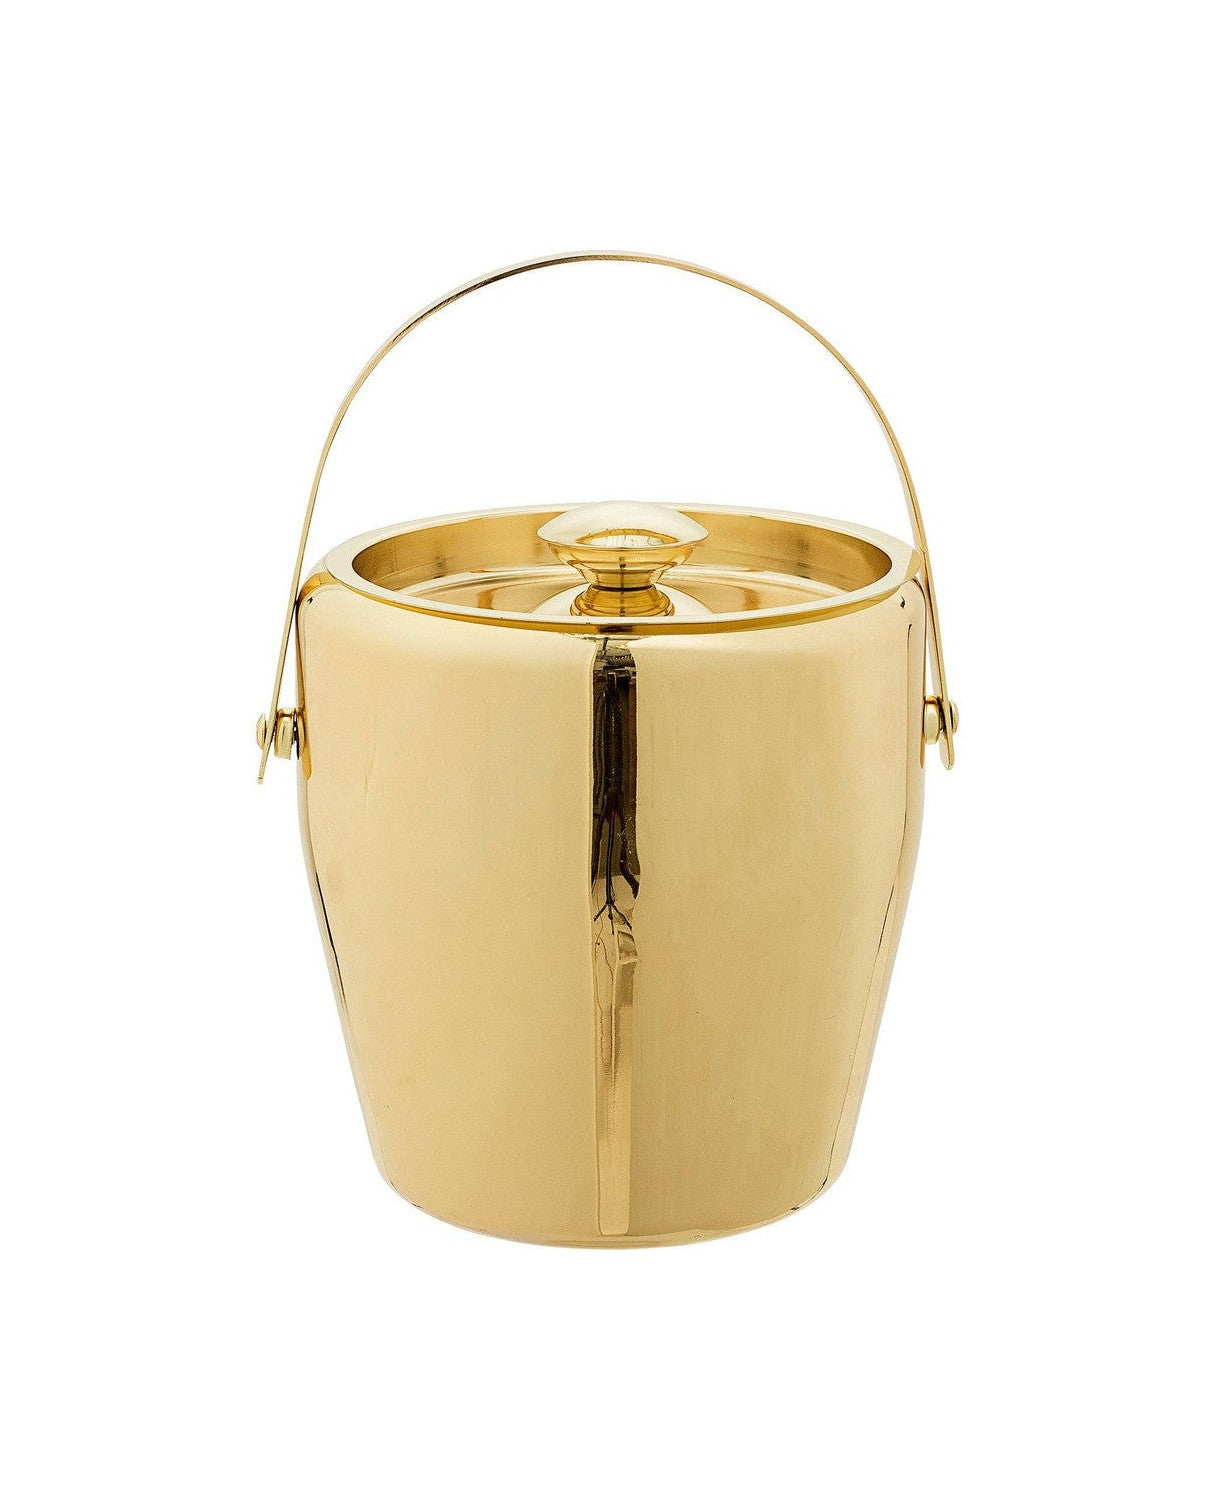 Bloomingville Cocktail Ice Bucket, Gold, Stainless Steel